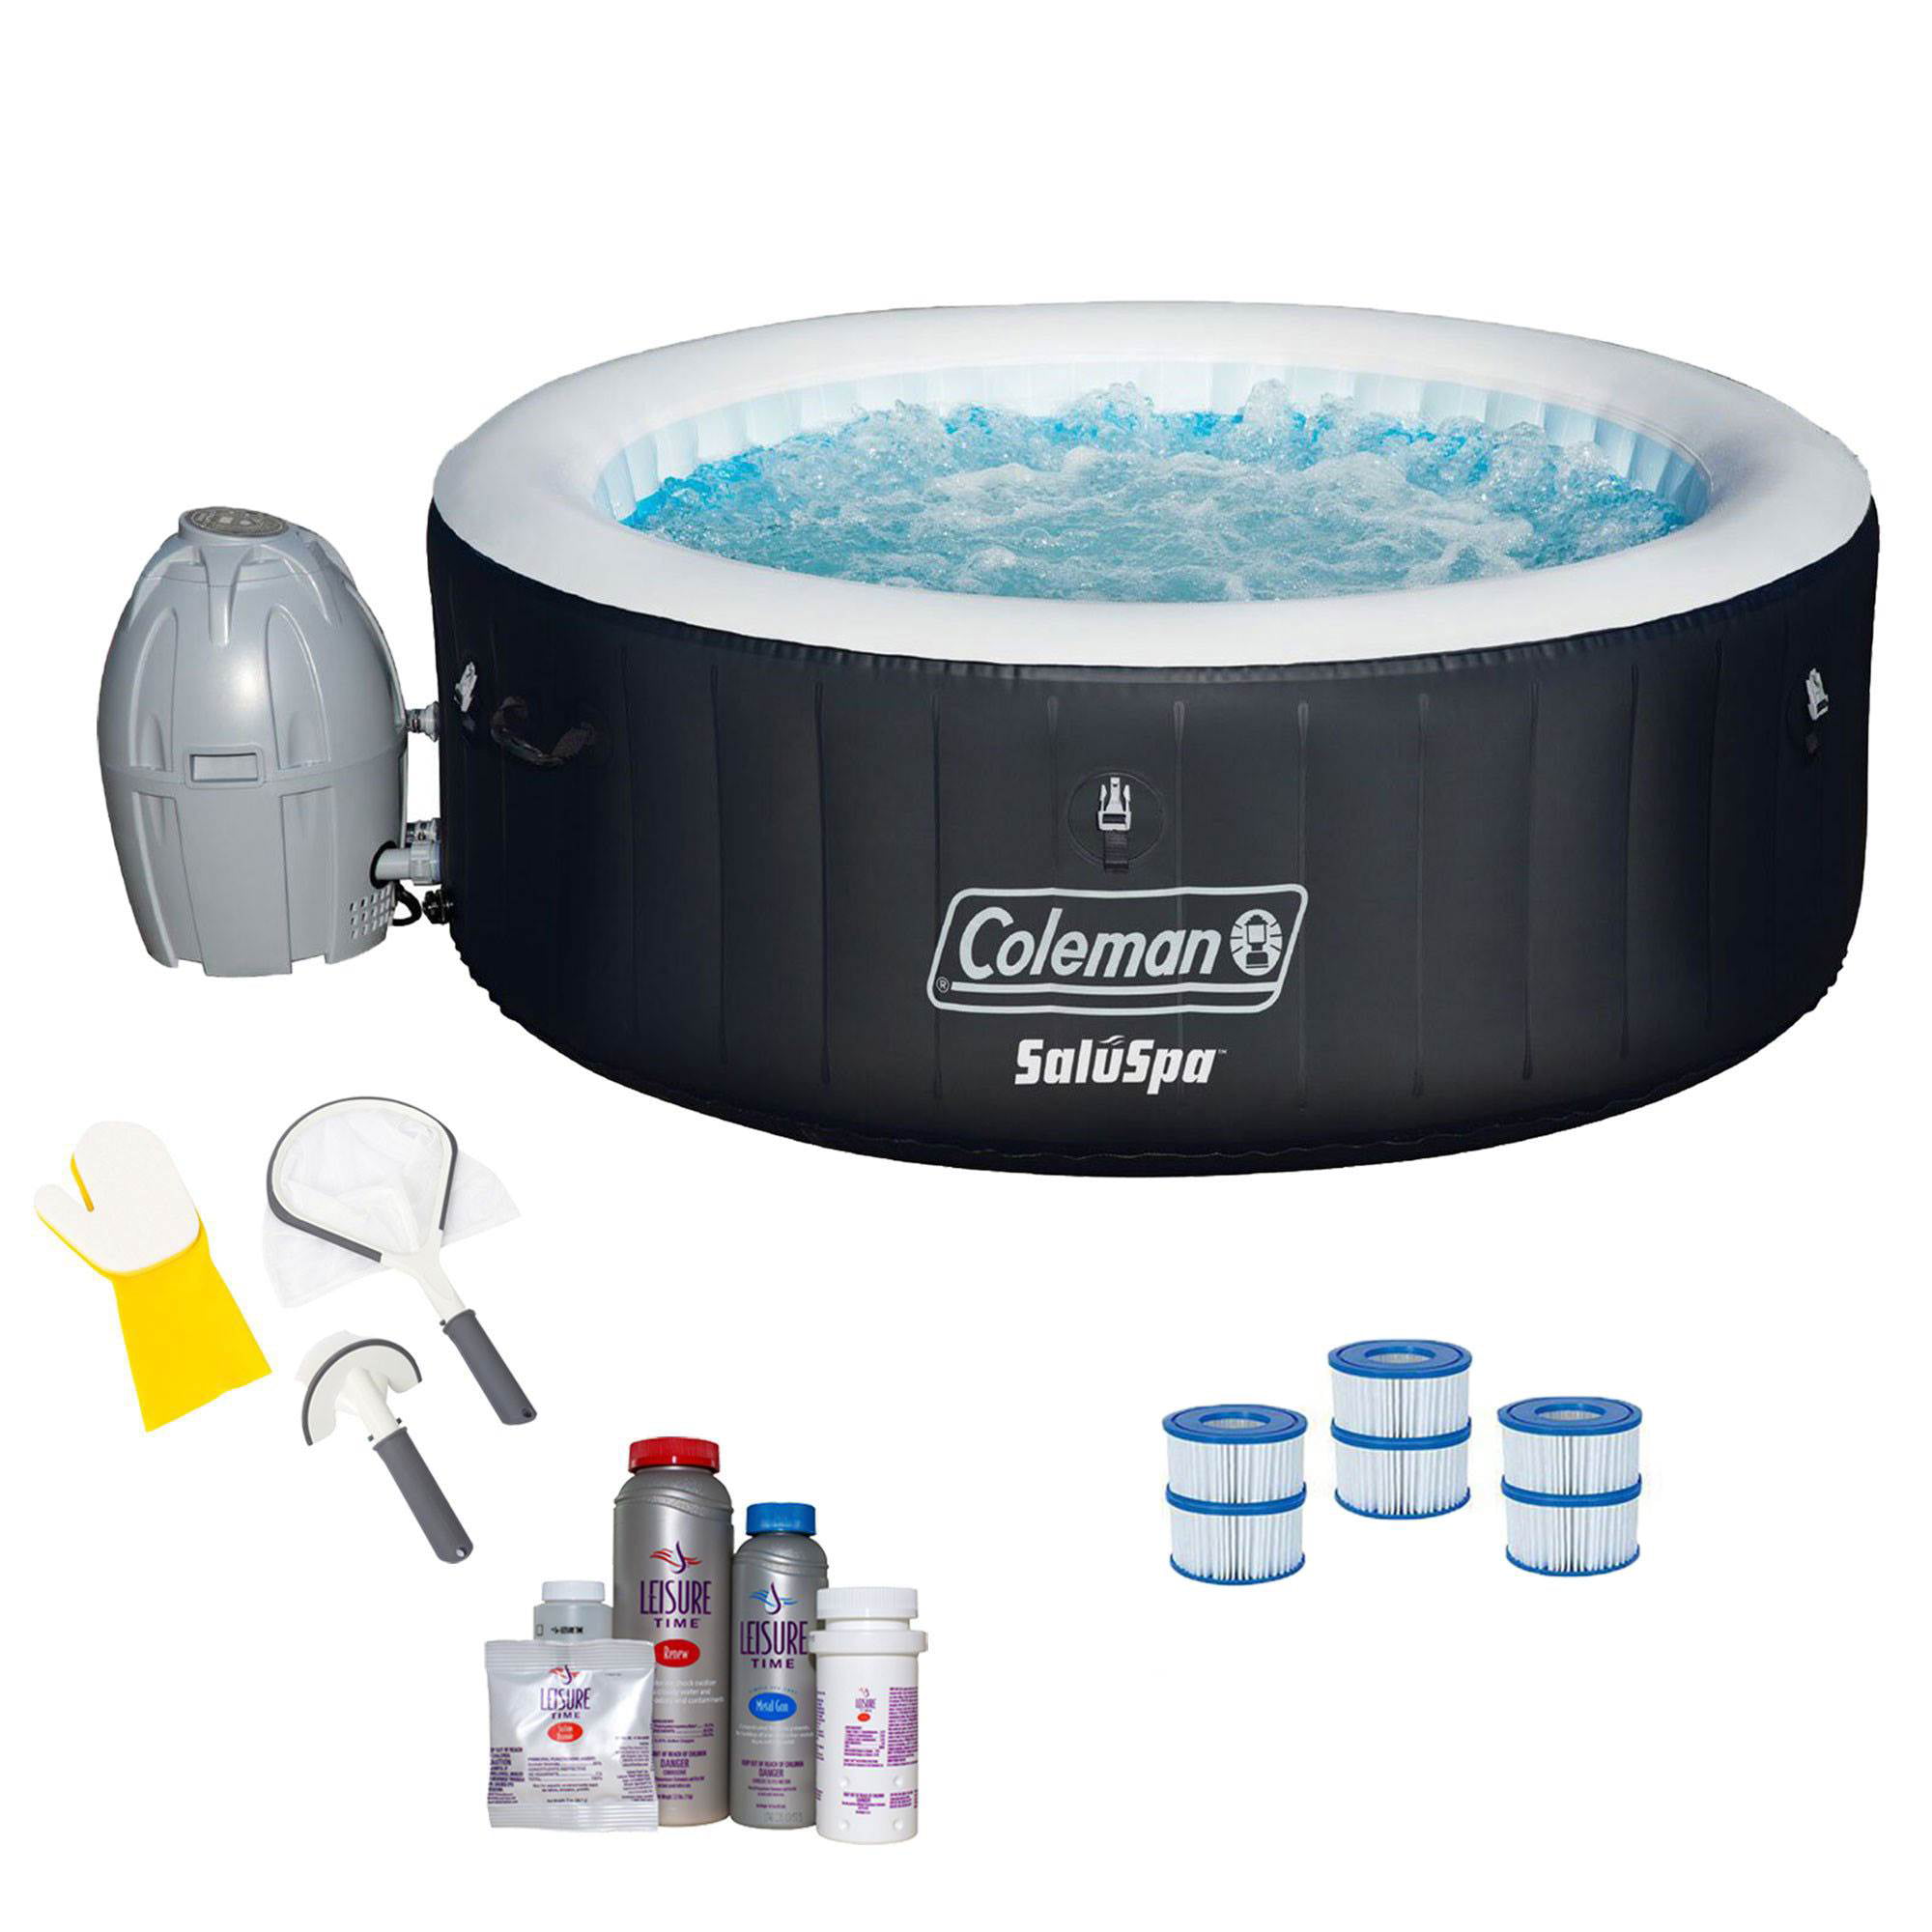 Coleman SaluSpa 4 Person Spa W/ Cleaning Tools Filter Cartridge.